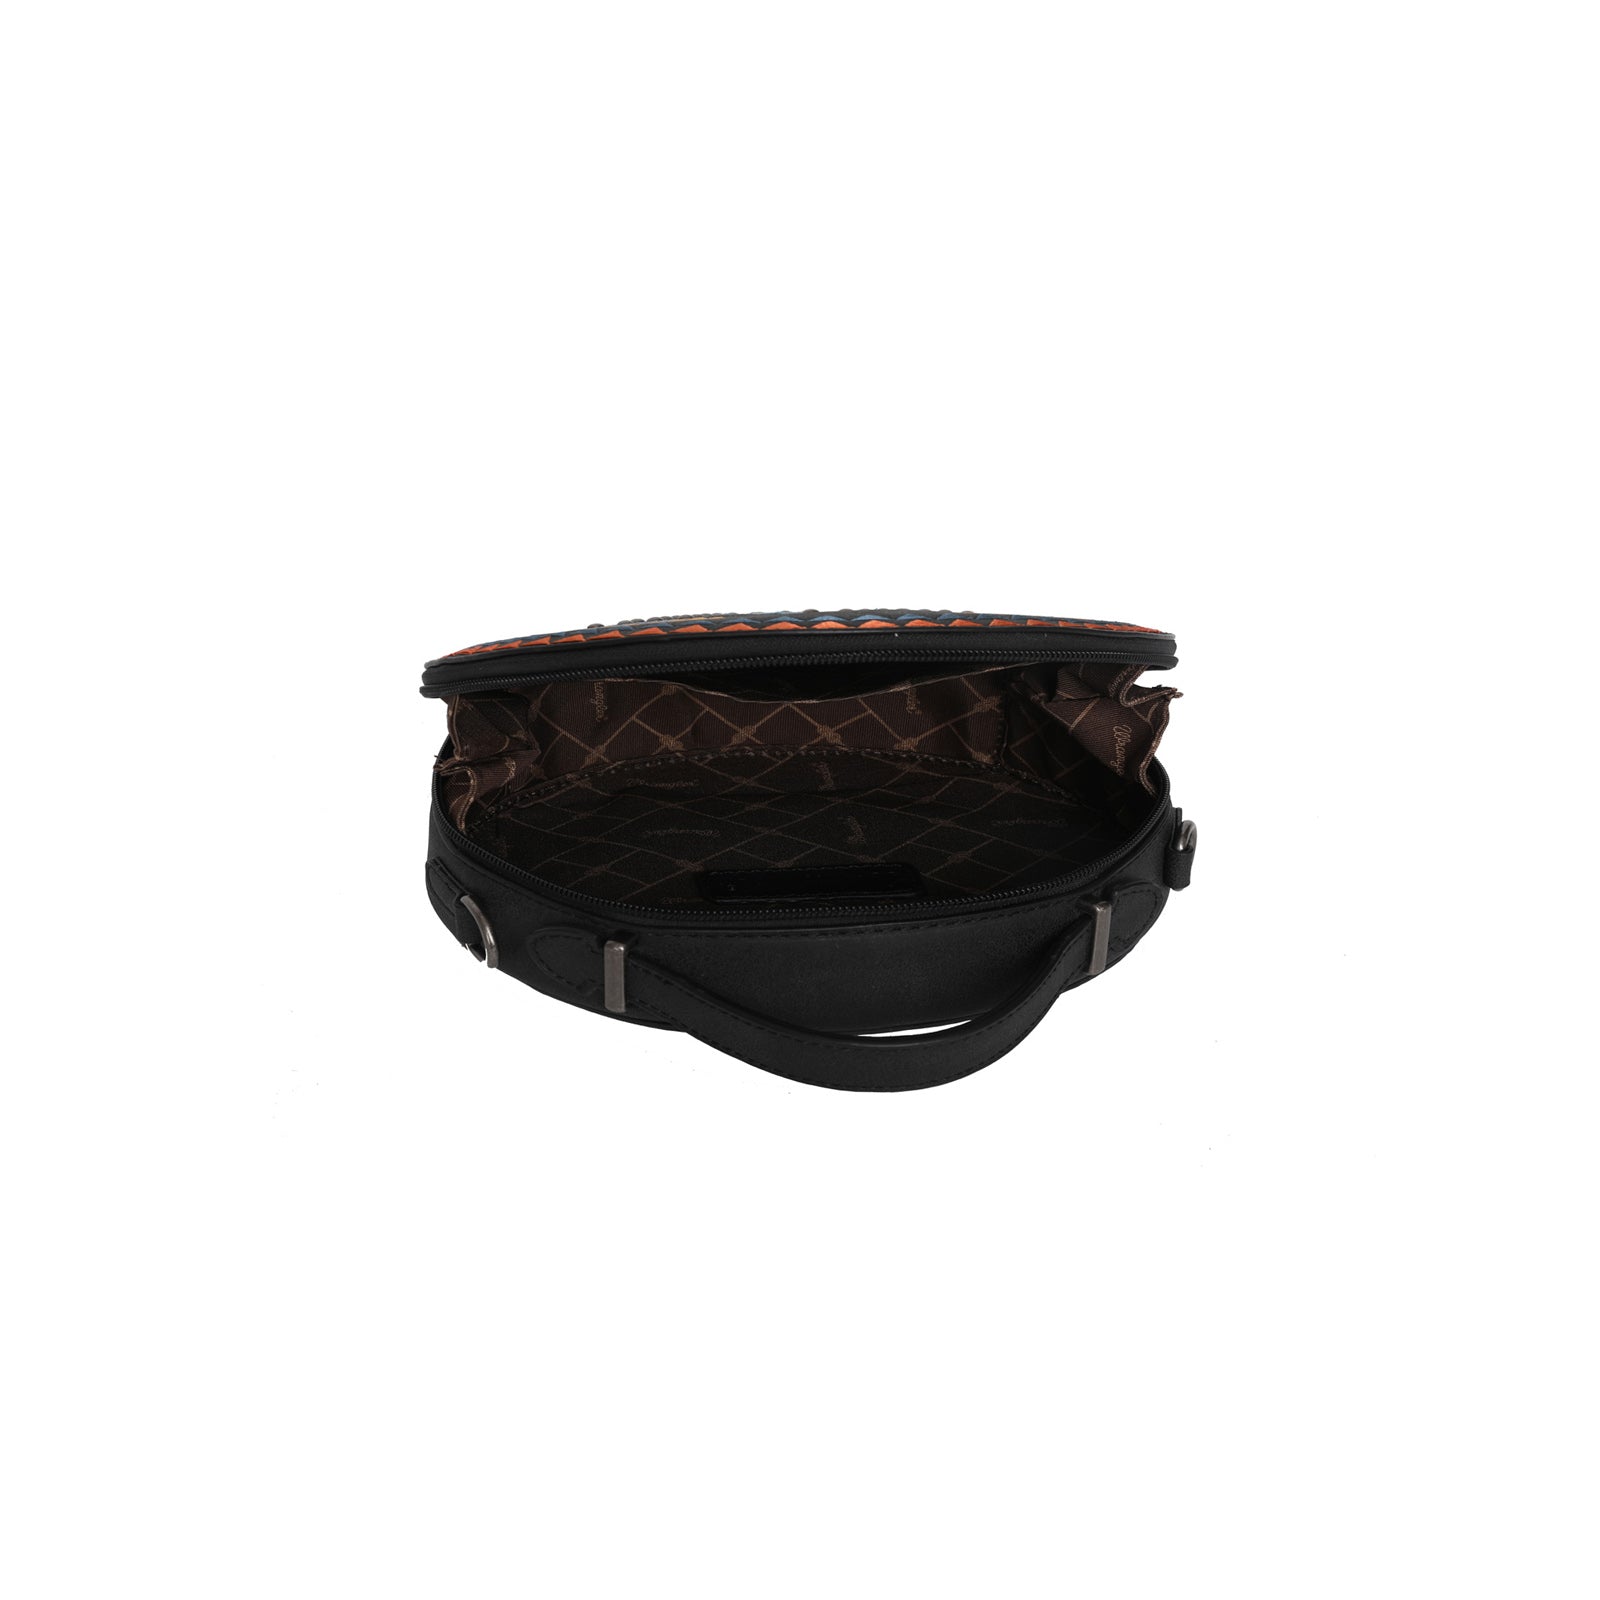 Wrangler Embroidered Collection Circle Bag/Crossbody - Cowgirl Wear